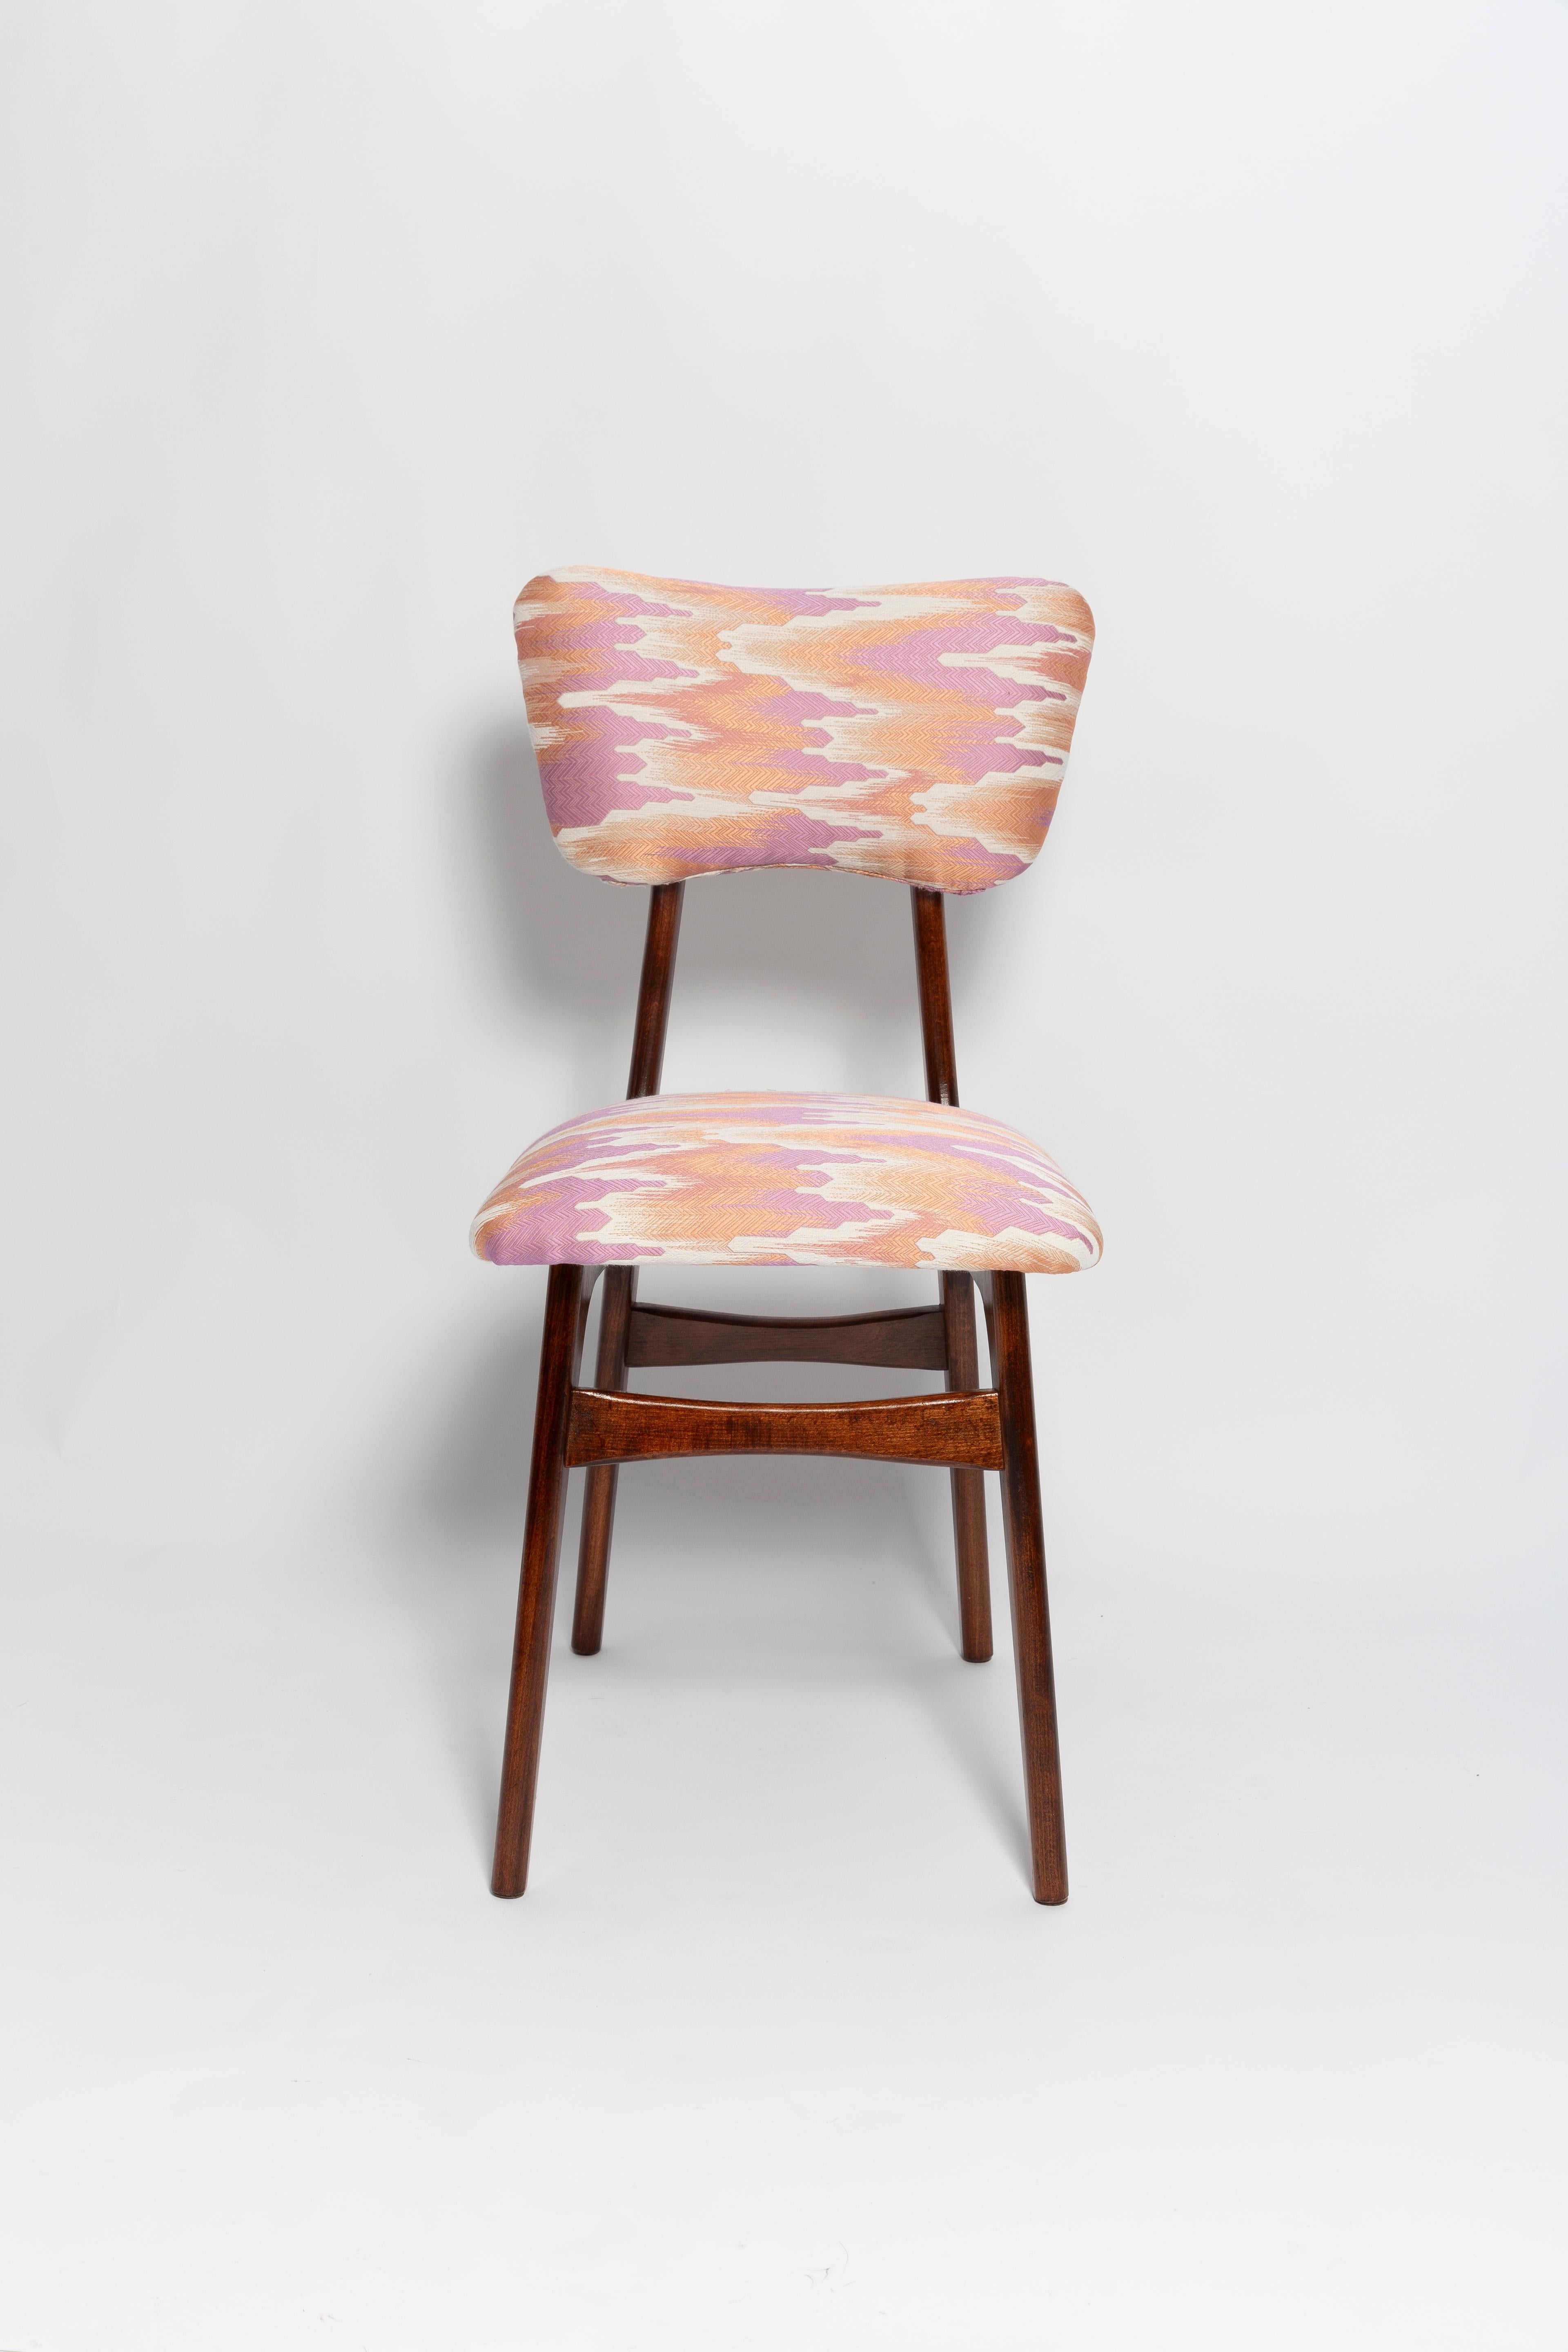 Hand-Crafted Eight Mid Century Butterfly Chairs, Fandango Jacquard, Dark Wood, Europe, 1960s For Sale